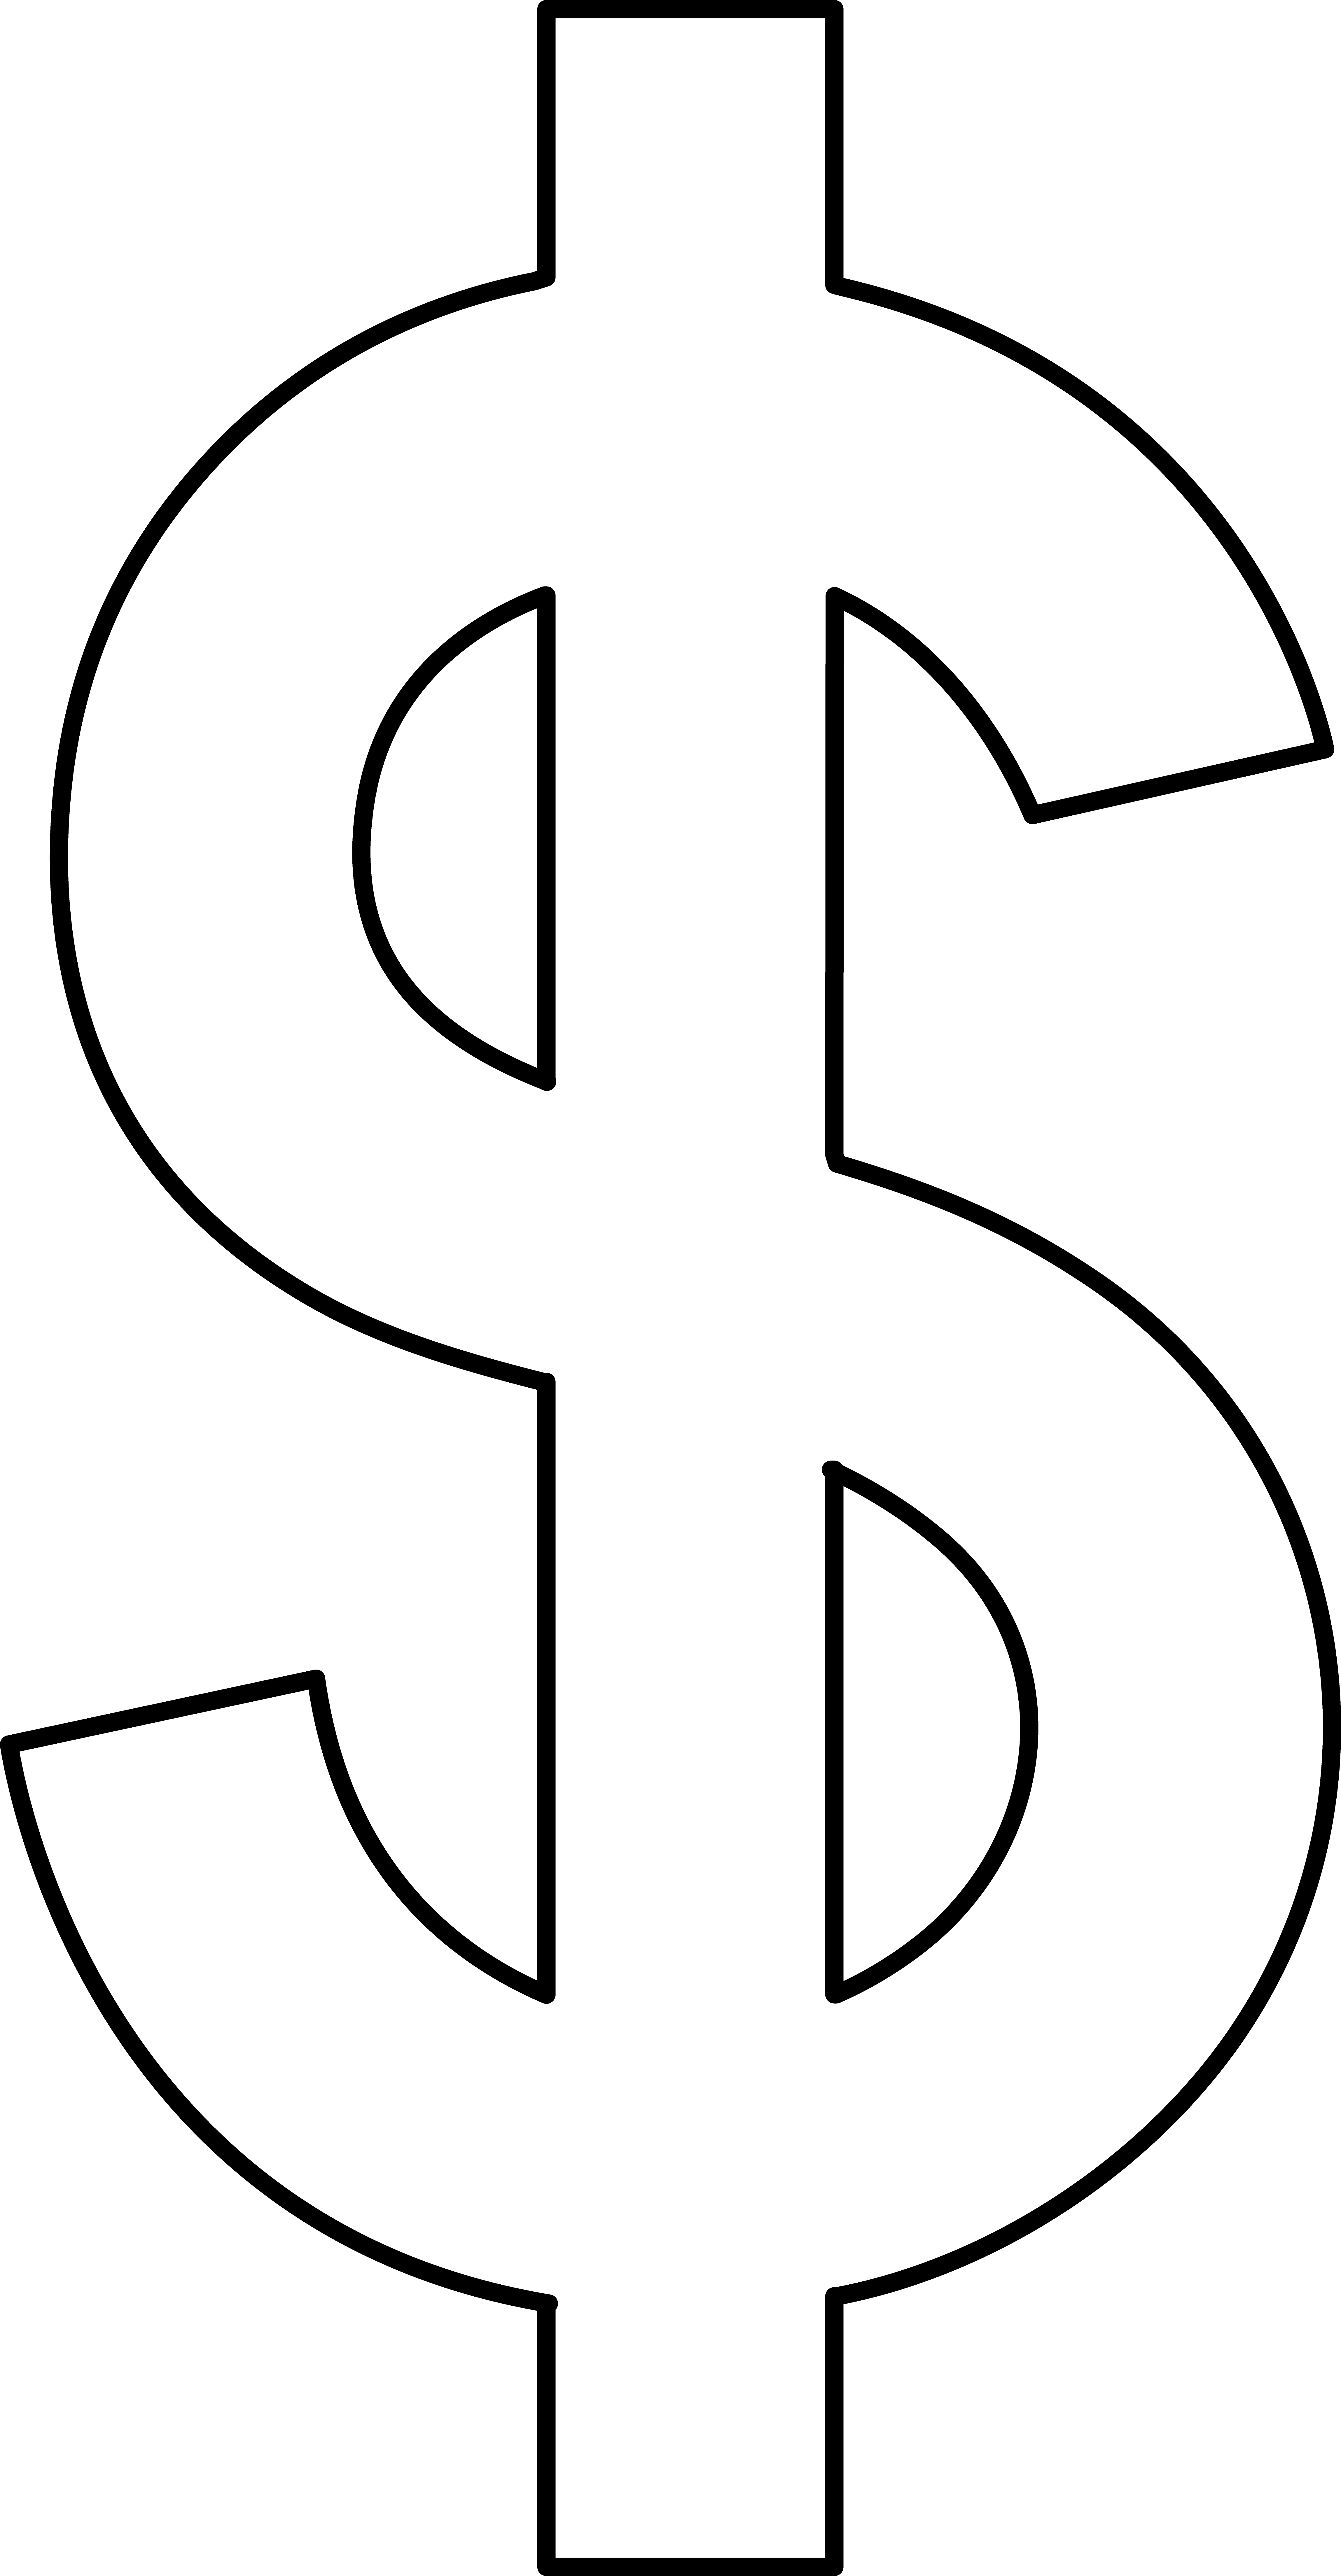 Dollar Sign Clip Art Black And White - Free ...